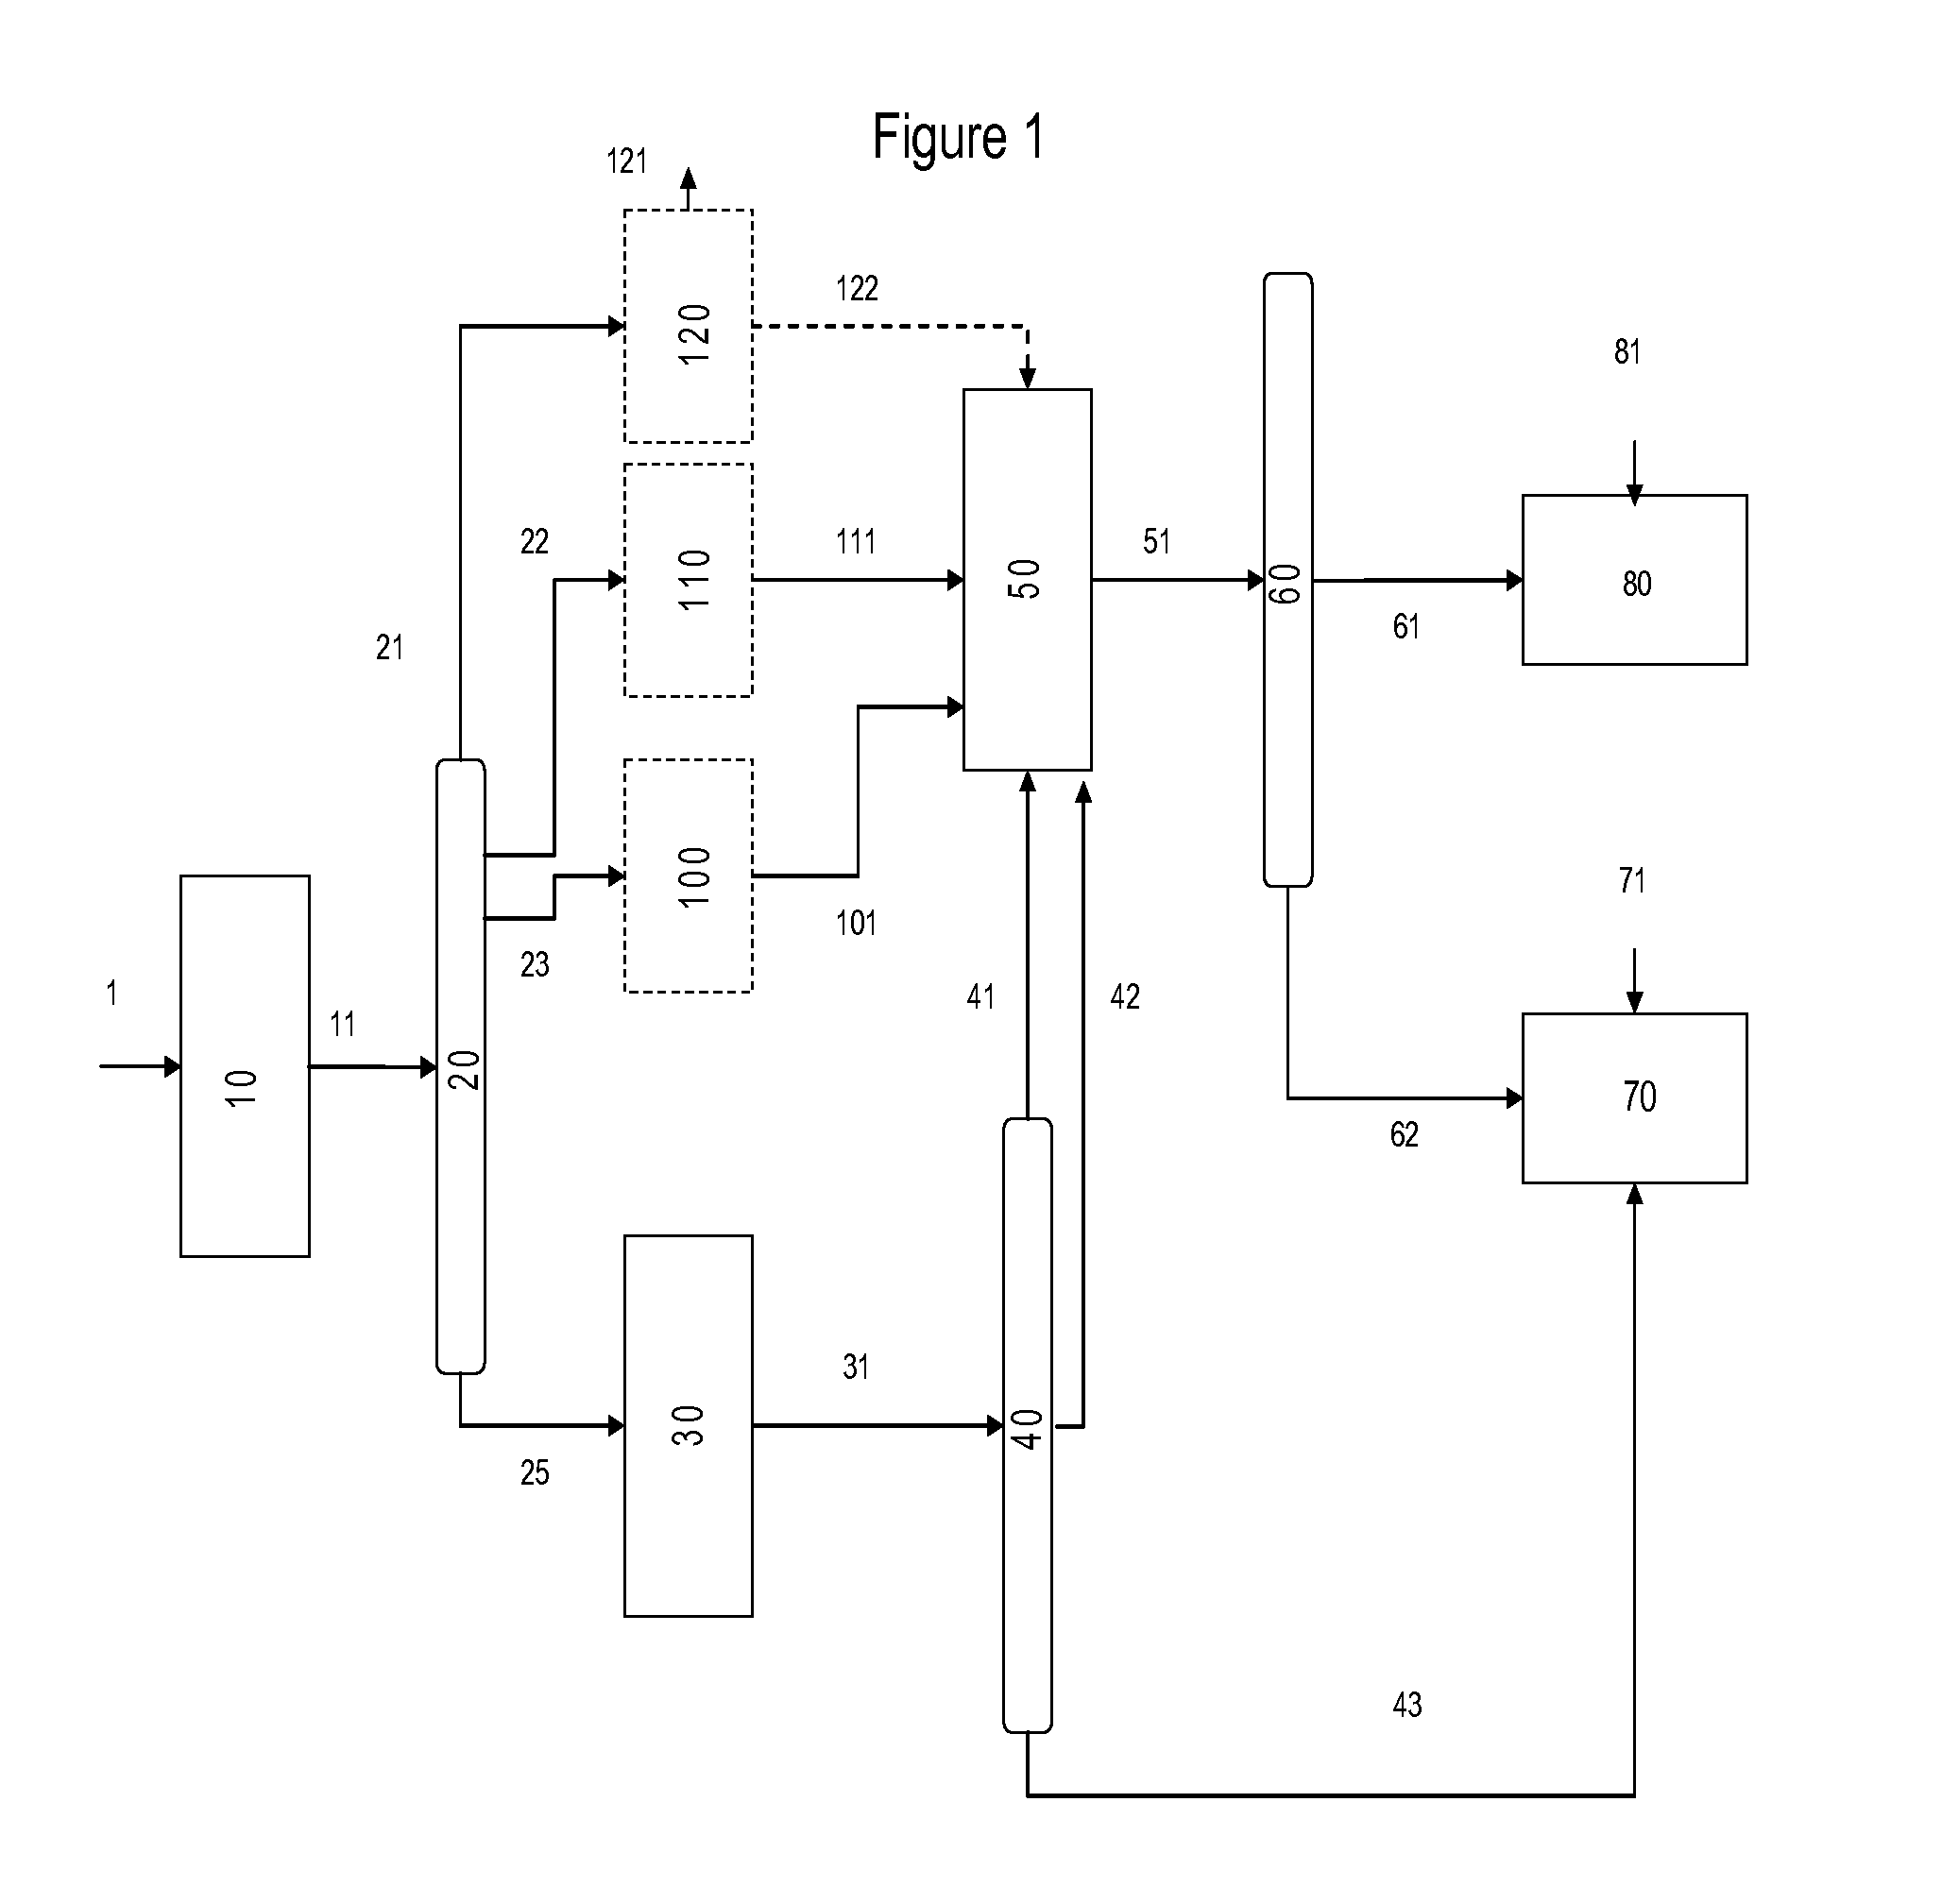 Production of distillate blending components